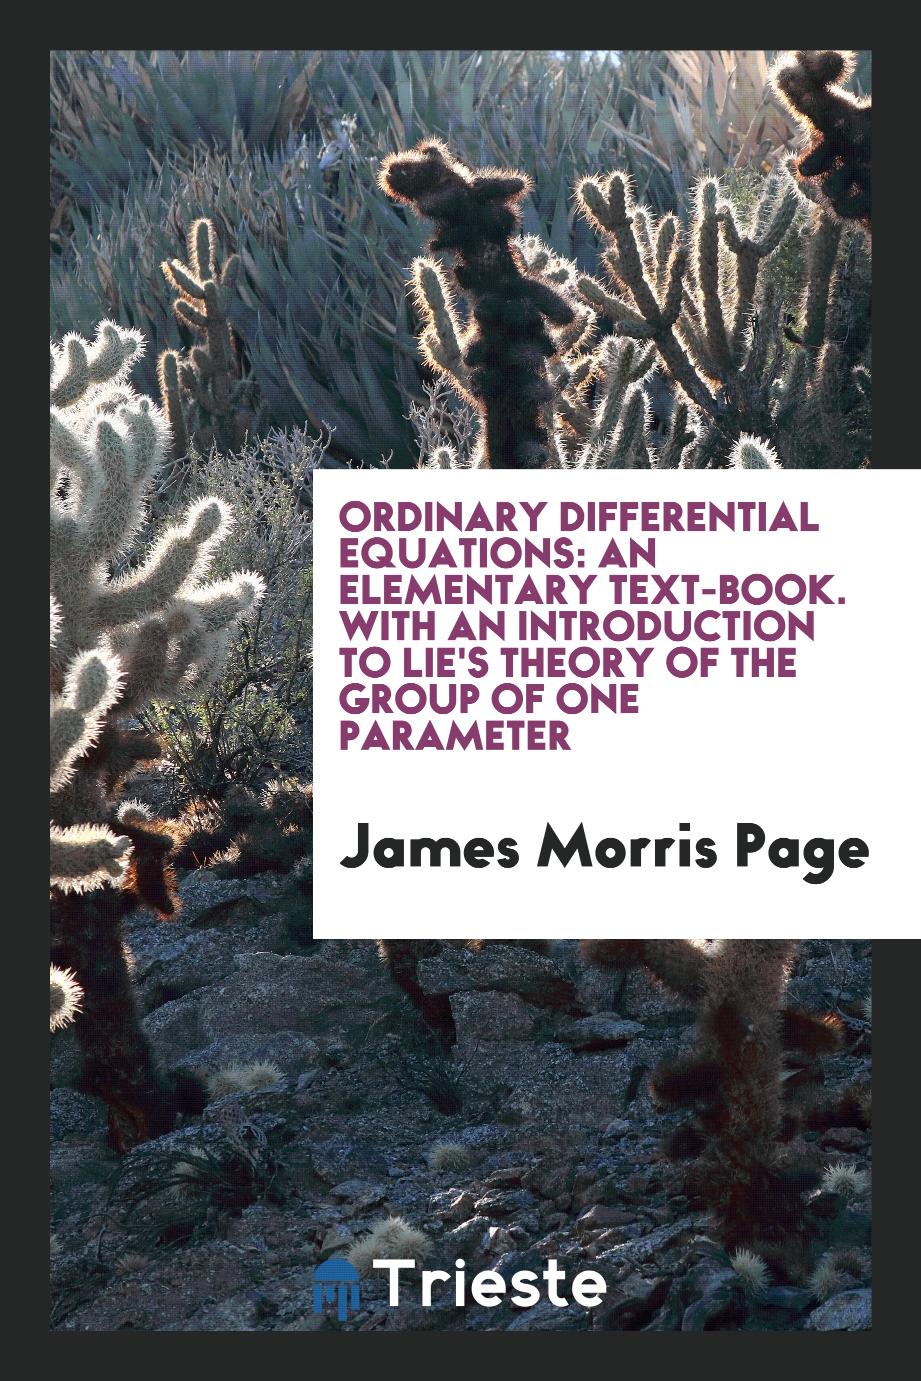 Ordinary differential equations: an elementary text-book. With an introduction to Lie's theory of the group of one parameter